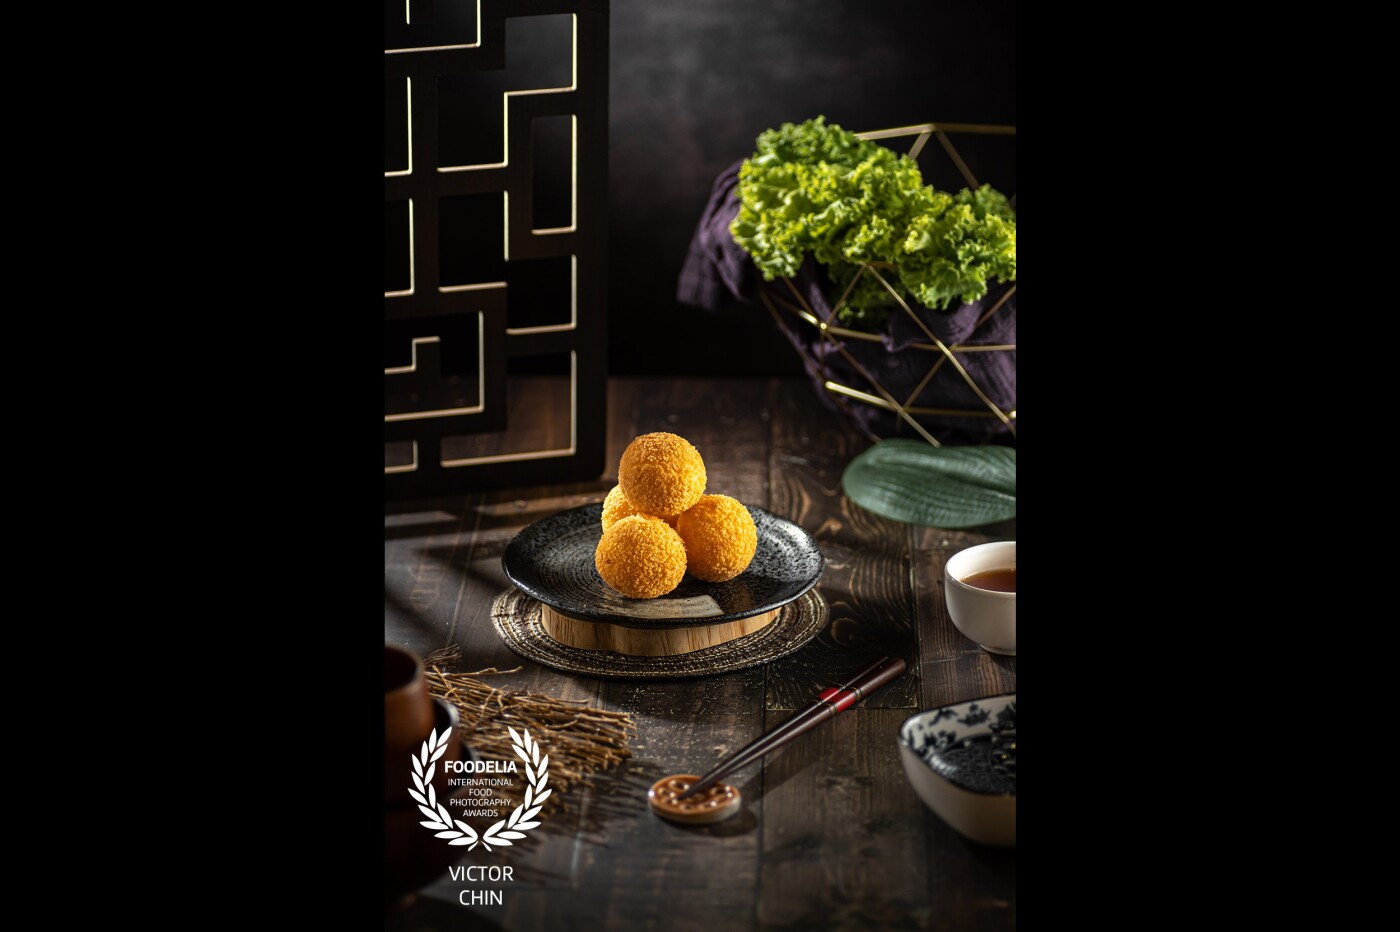 Golden Sesame Ball. Shot this with styling for poster and packaging usages. 3 lights have been used to create this art. Making the golden ball pops.